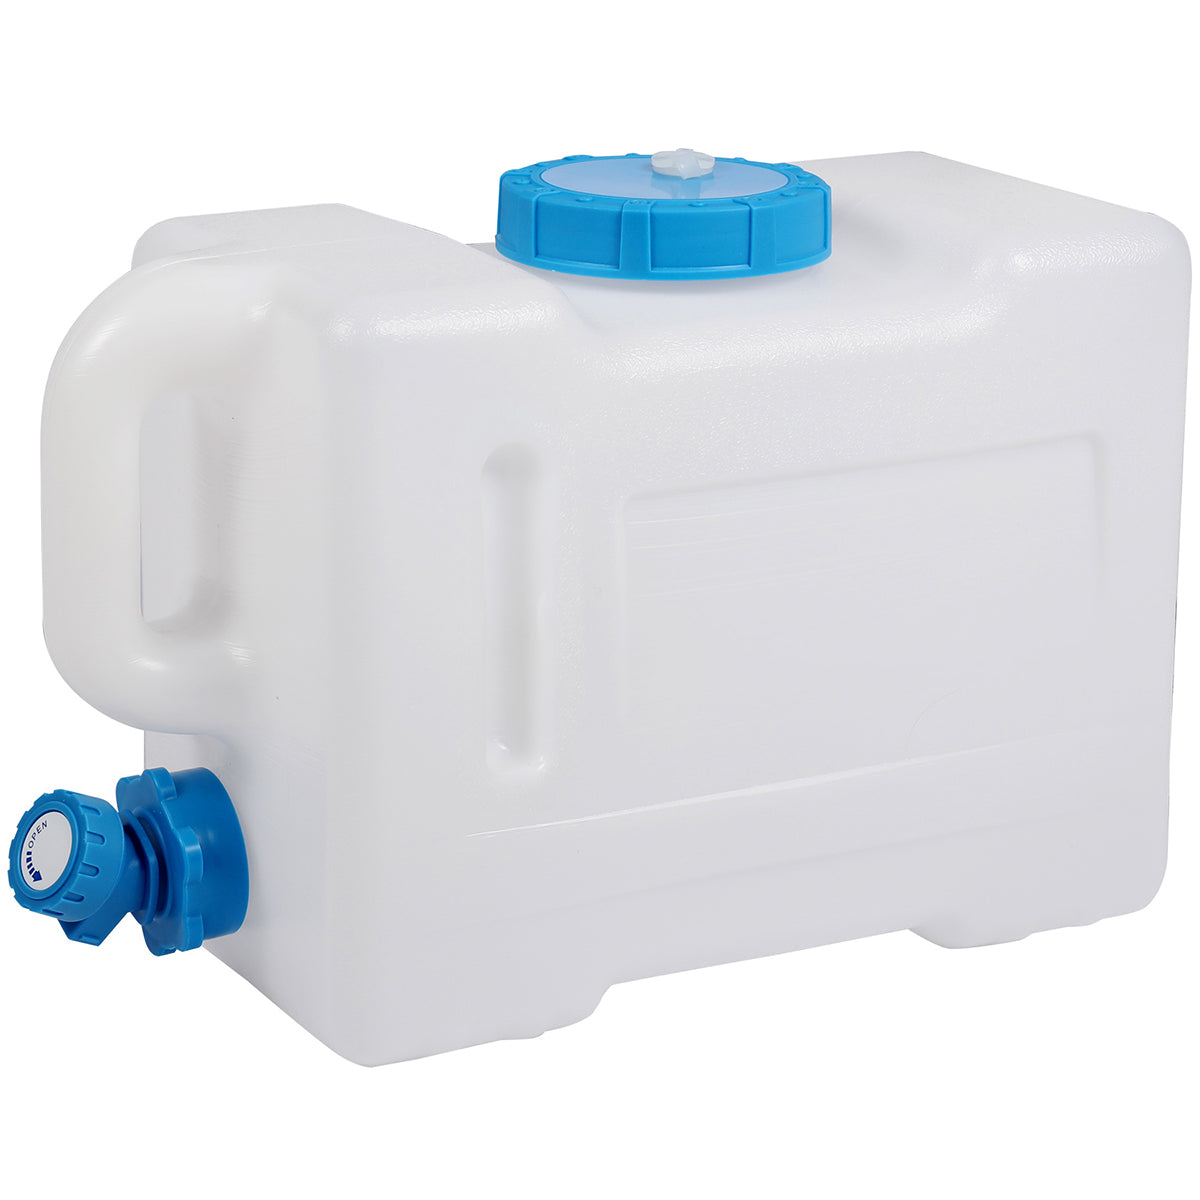 Water Storage Containers,Camping Water Container,3.9 Gallon